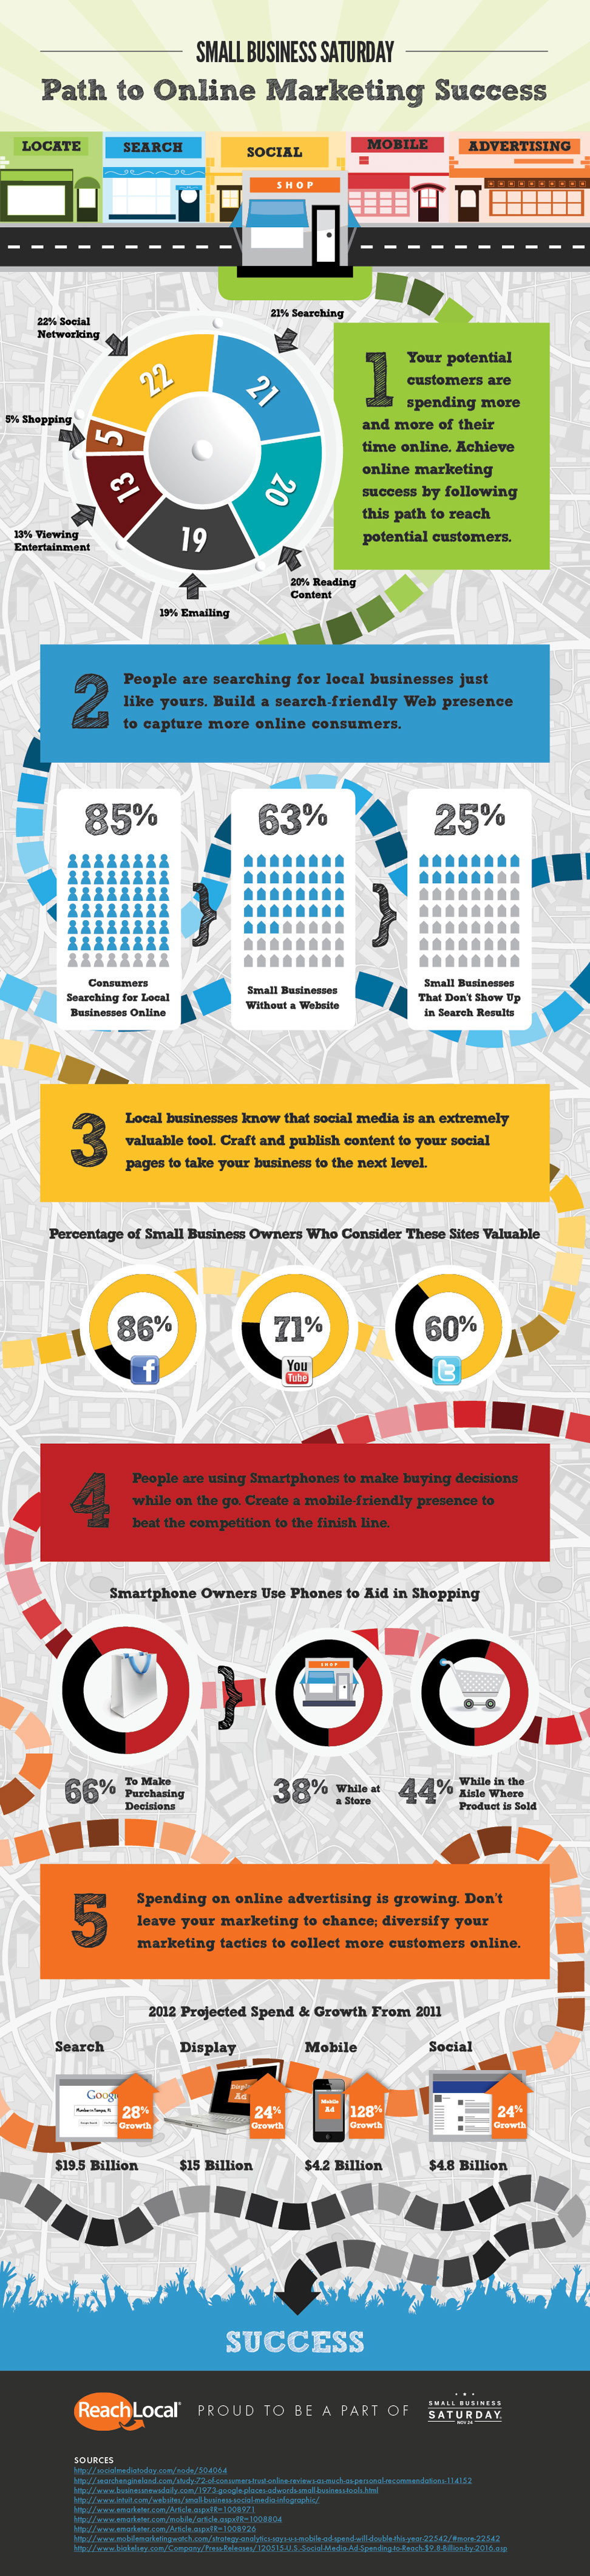 Small Business Online Marketing Guide-Infographic